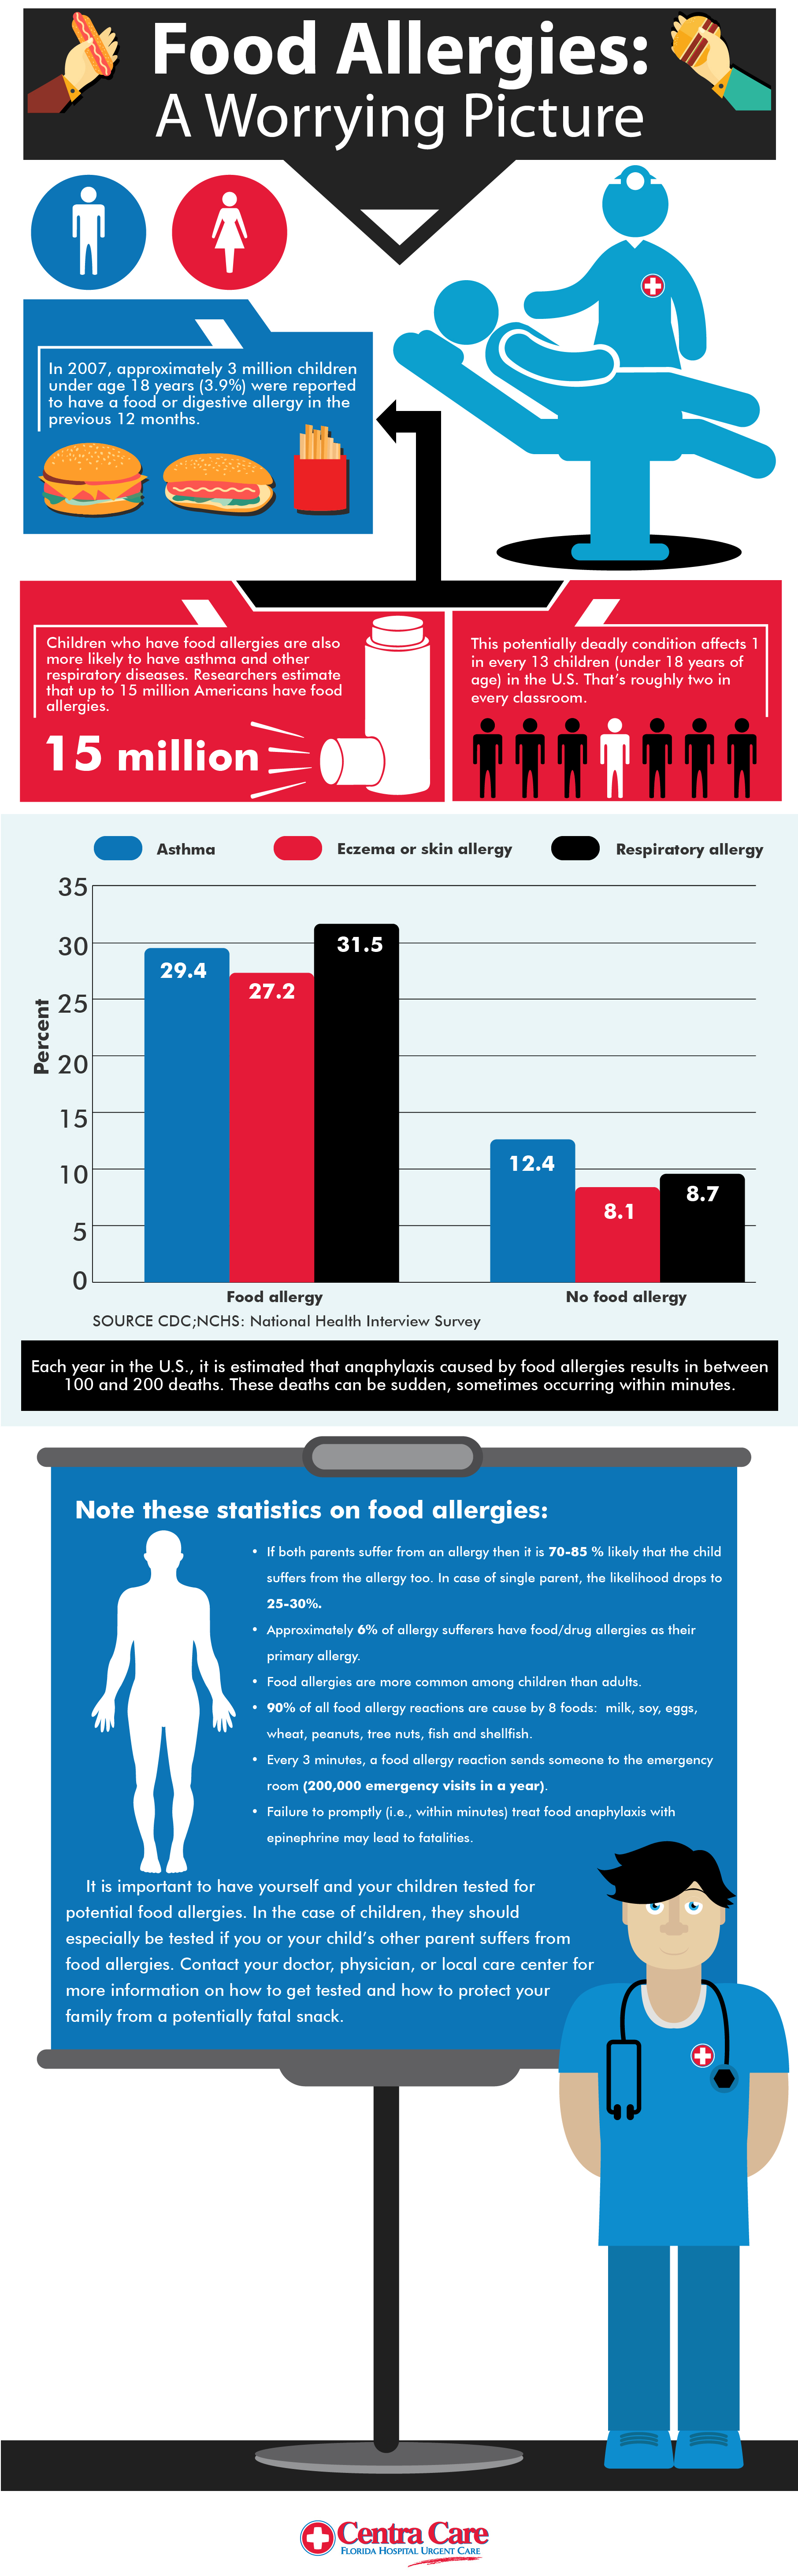 Food Allergies: A Worrying Picture